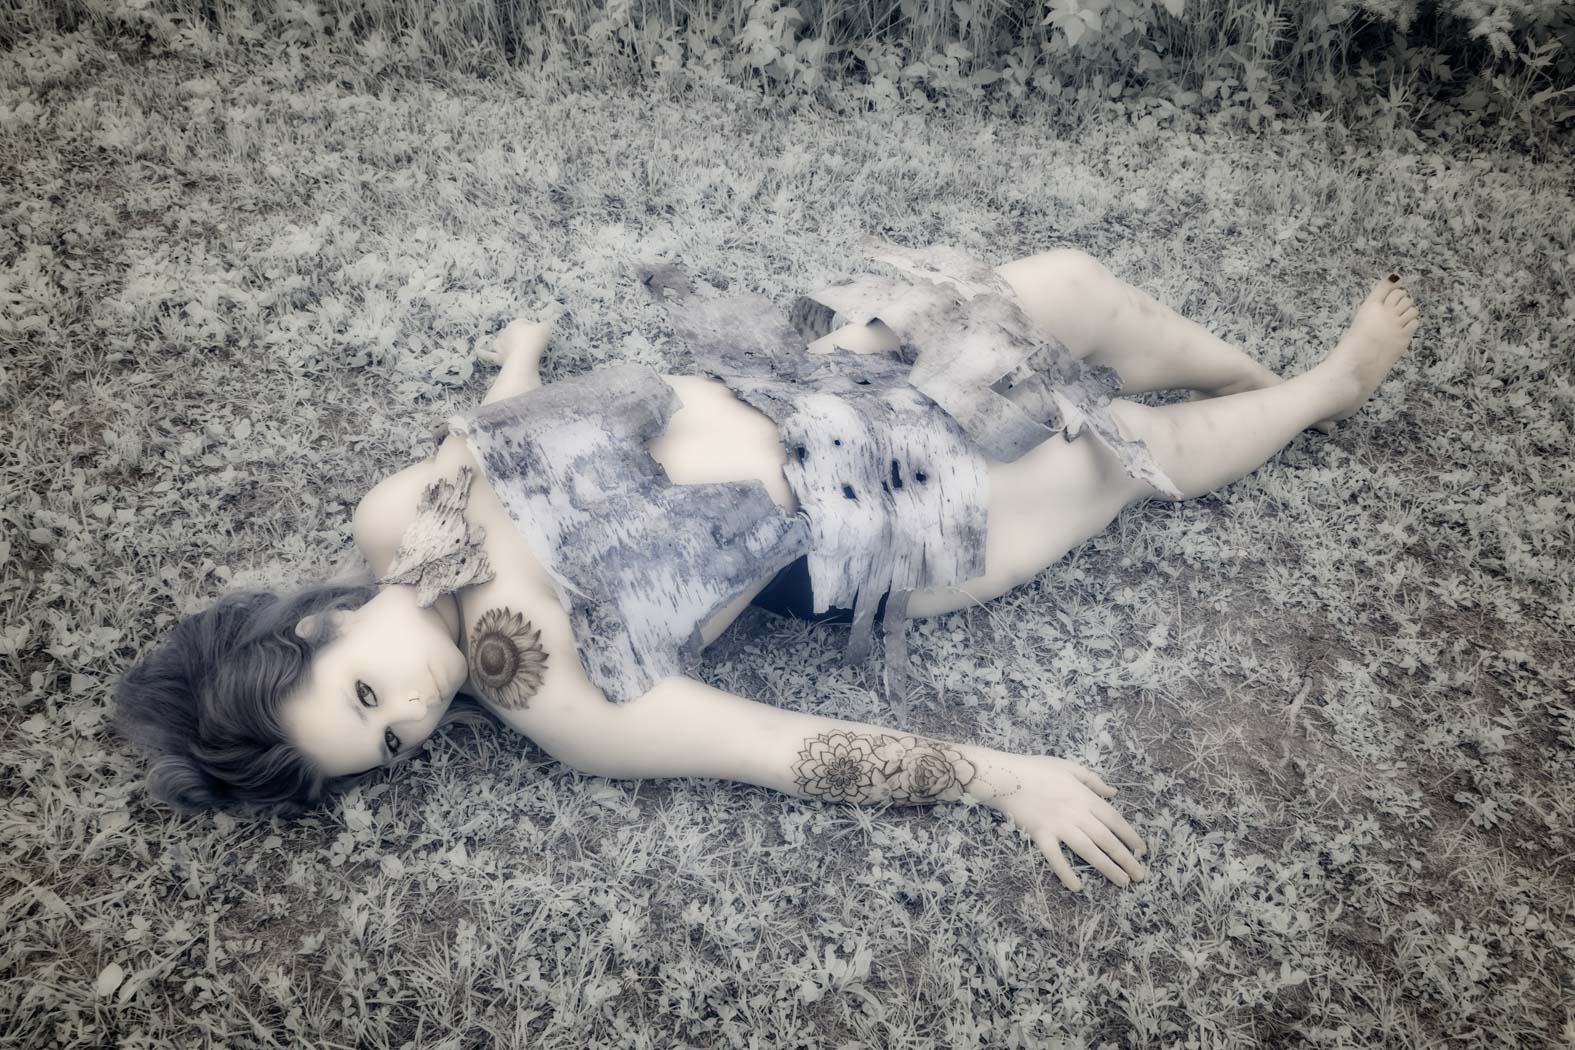 blurry image of a woman laying down on the grass with plants and herbs over her body